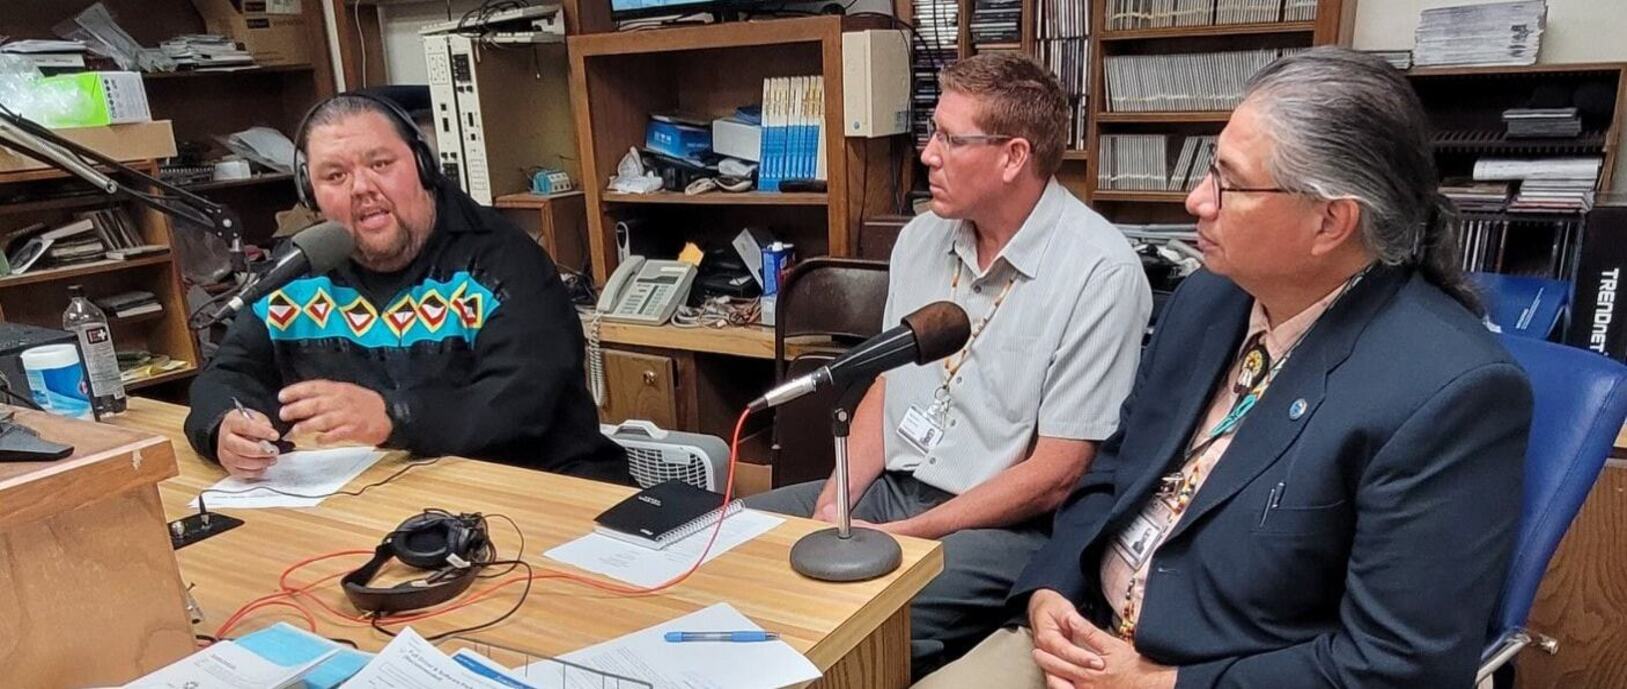 Banner picture of three males sitting down in a Radio Station in front of microphones. One man is talking with headphones on and there is two Guest sitting next to him.
Radio Program